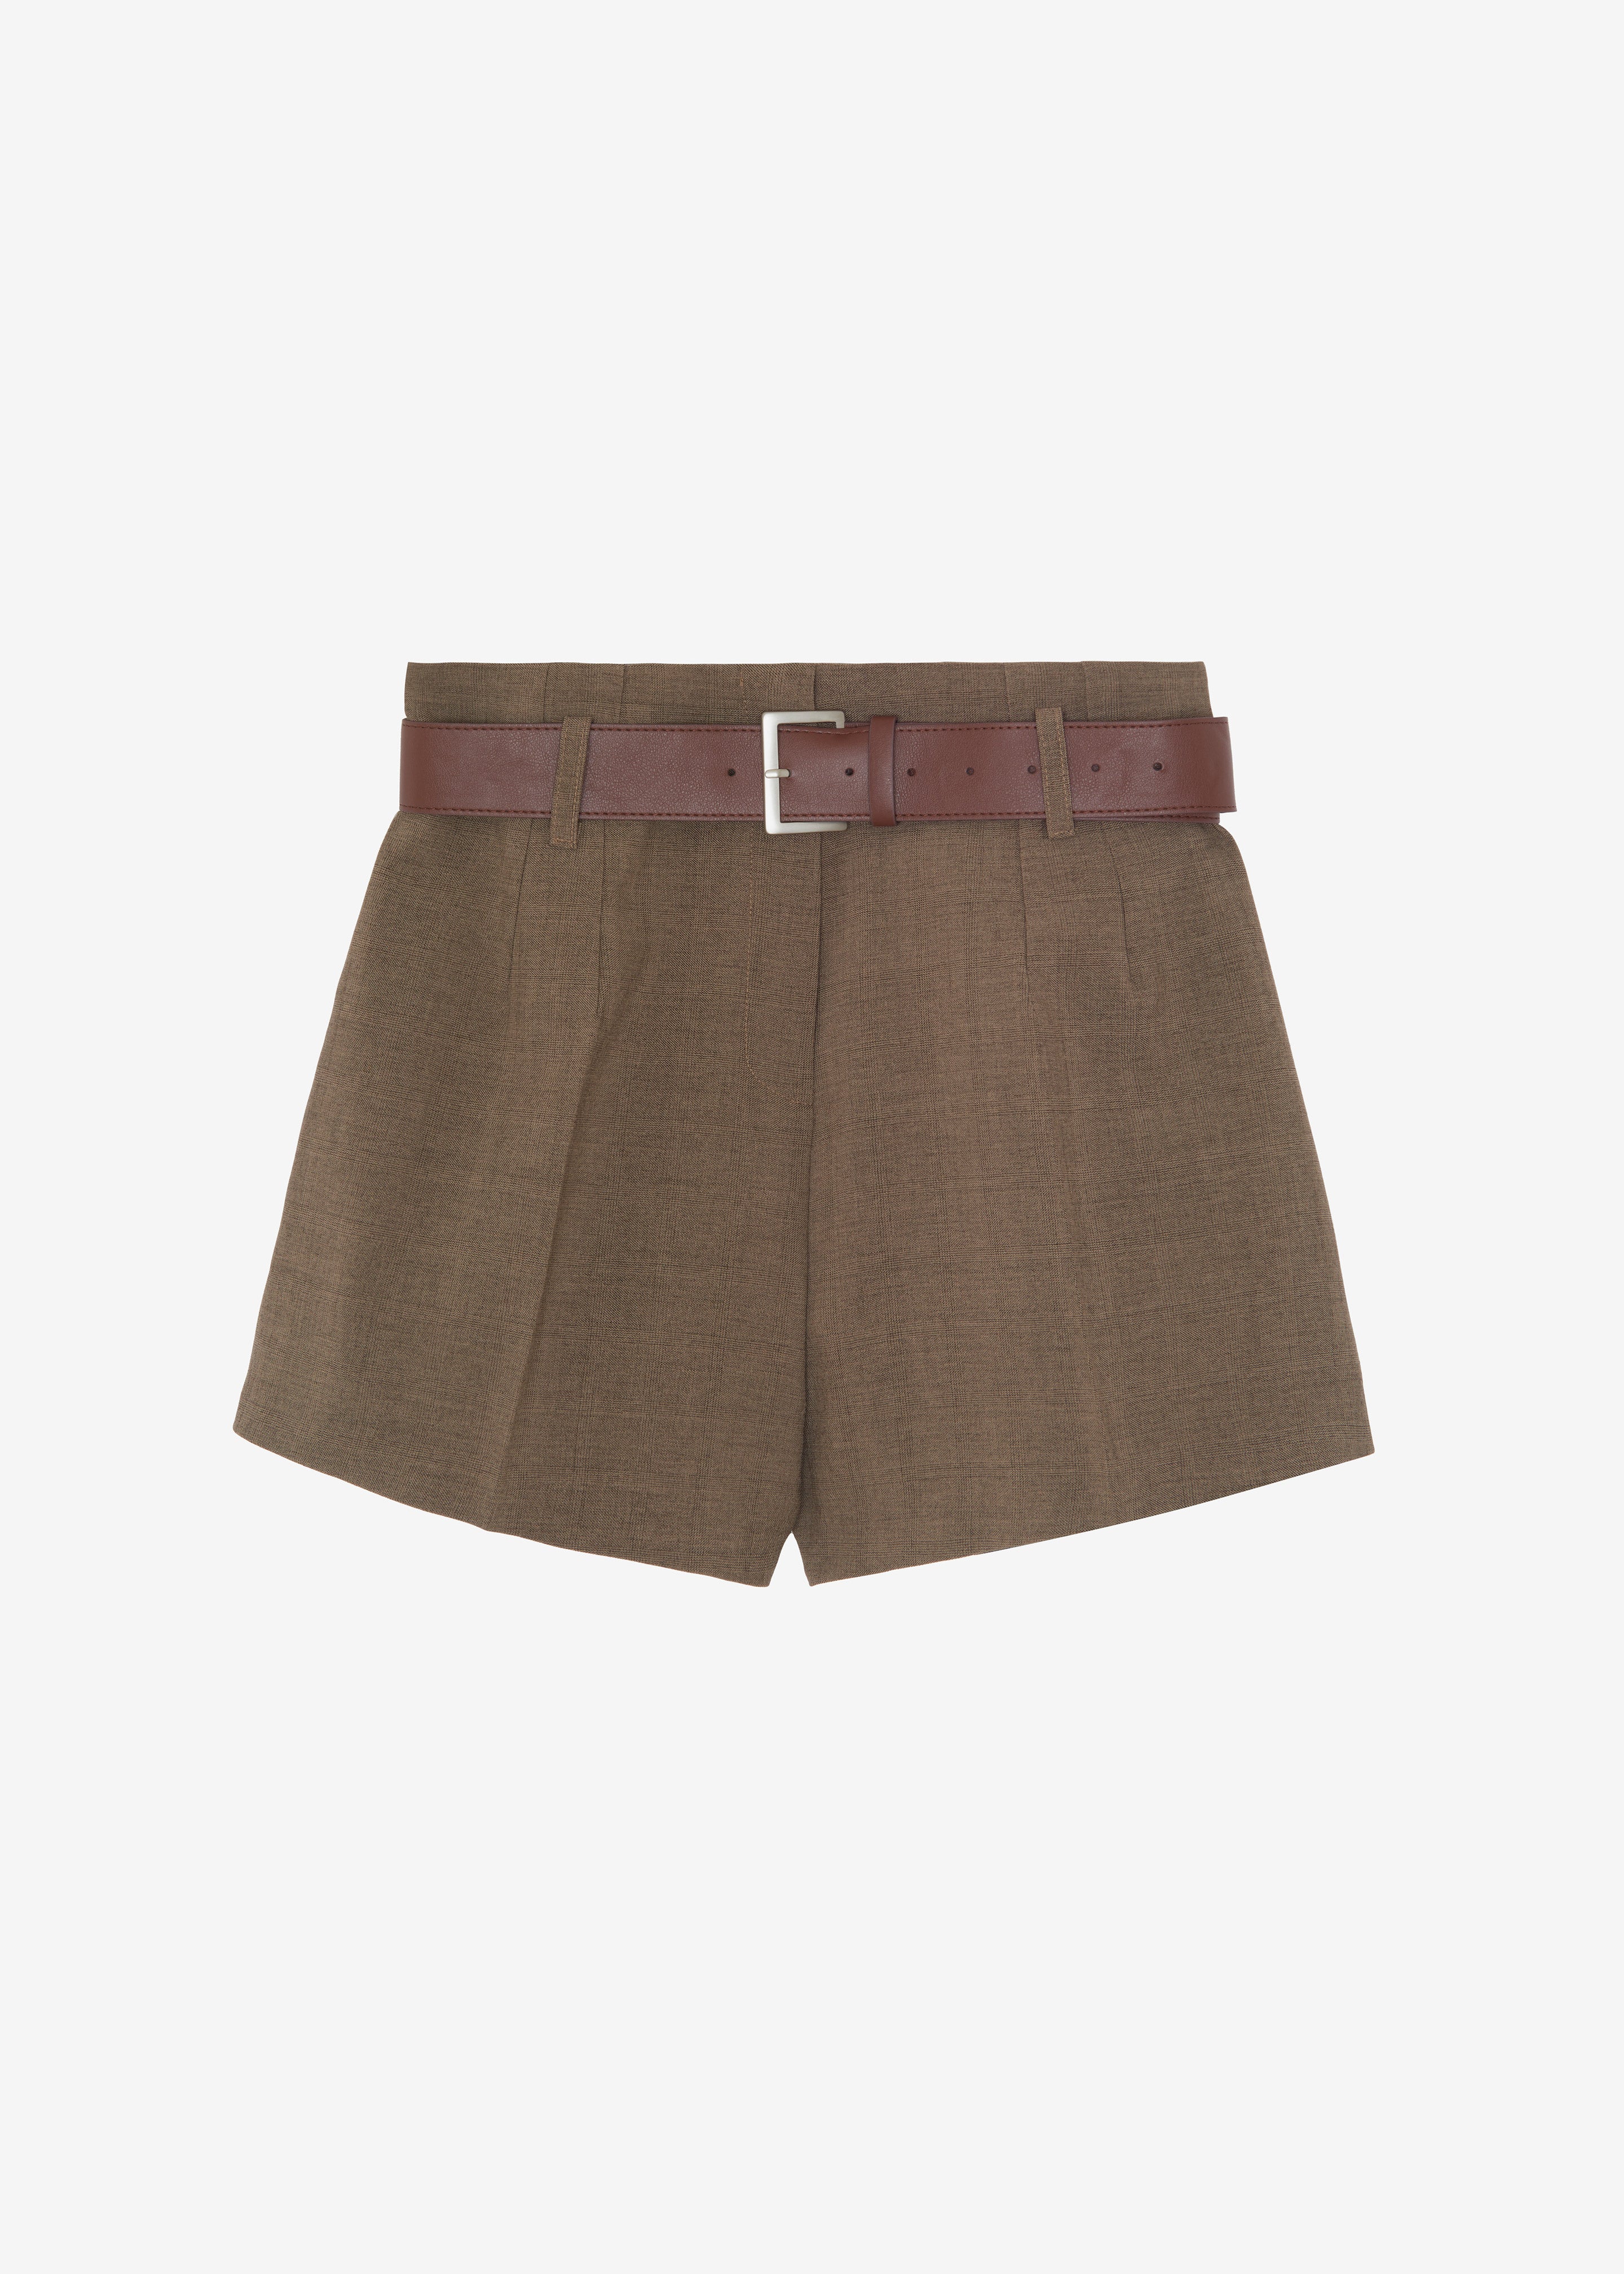 Chappell Belted Shorts - Brown - 13